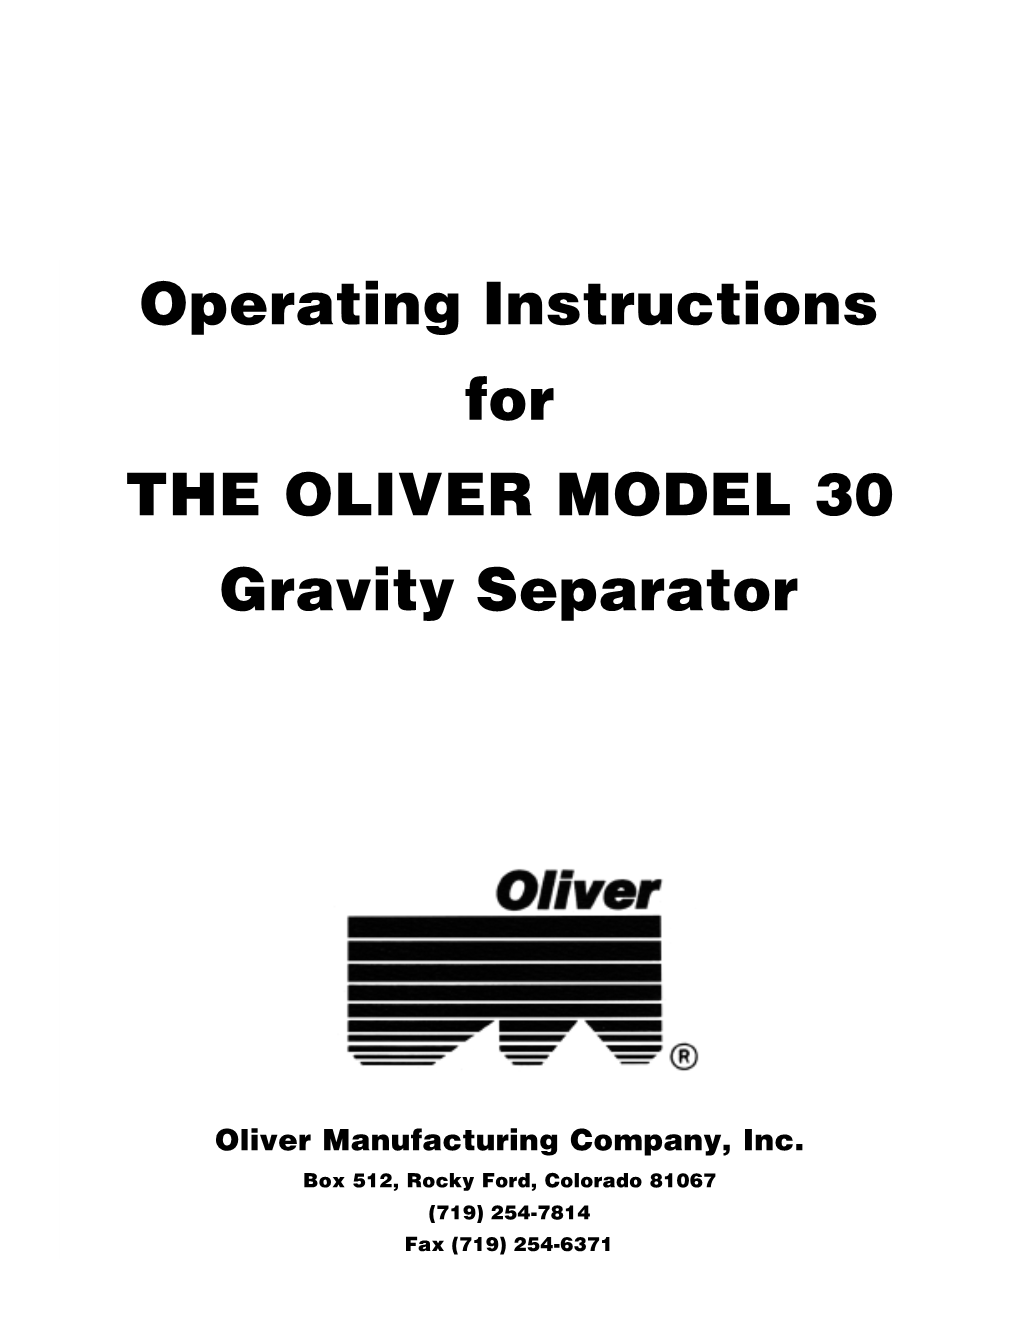 Operating Instructions for the OLIVER MODEL 30 Gravity Separator